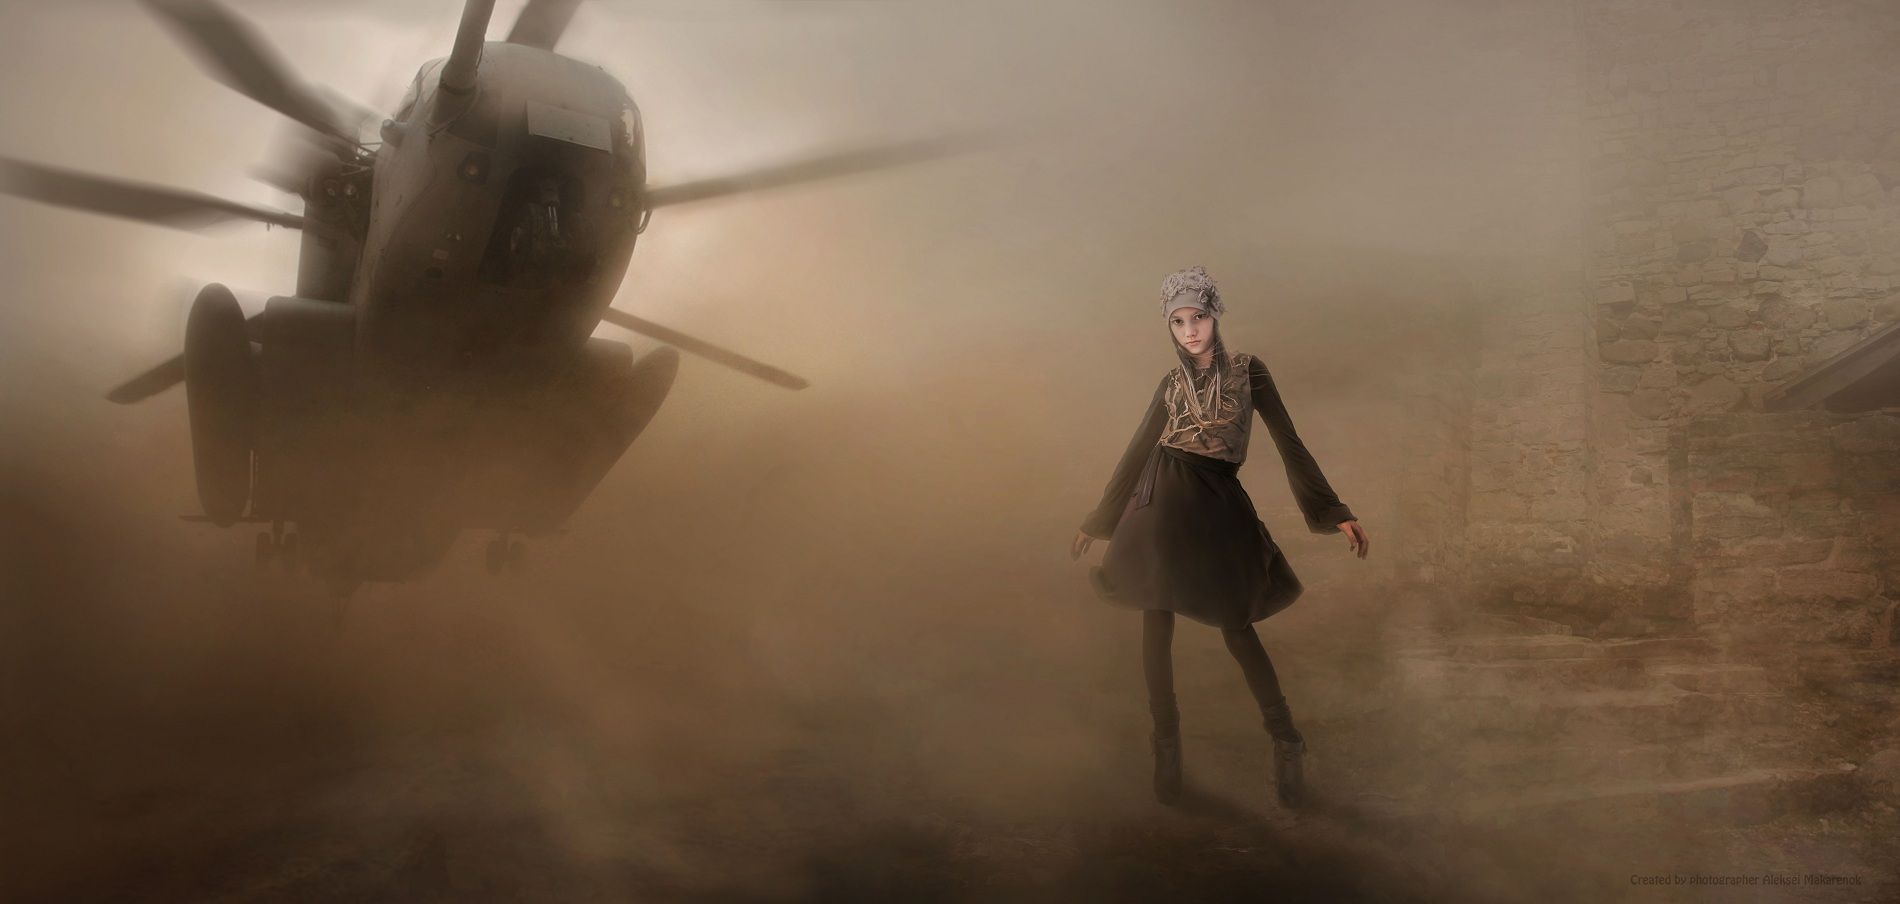 Wallpaper, women, helicopter, dust, sand, children, looking at viewer, Photohop 1900x904